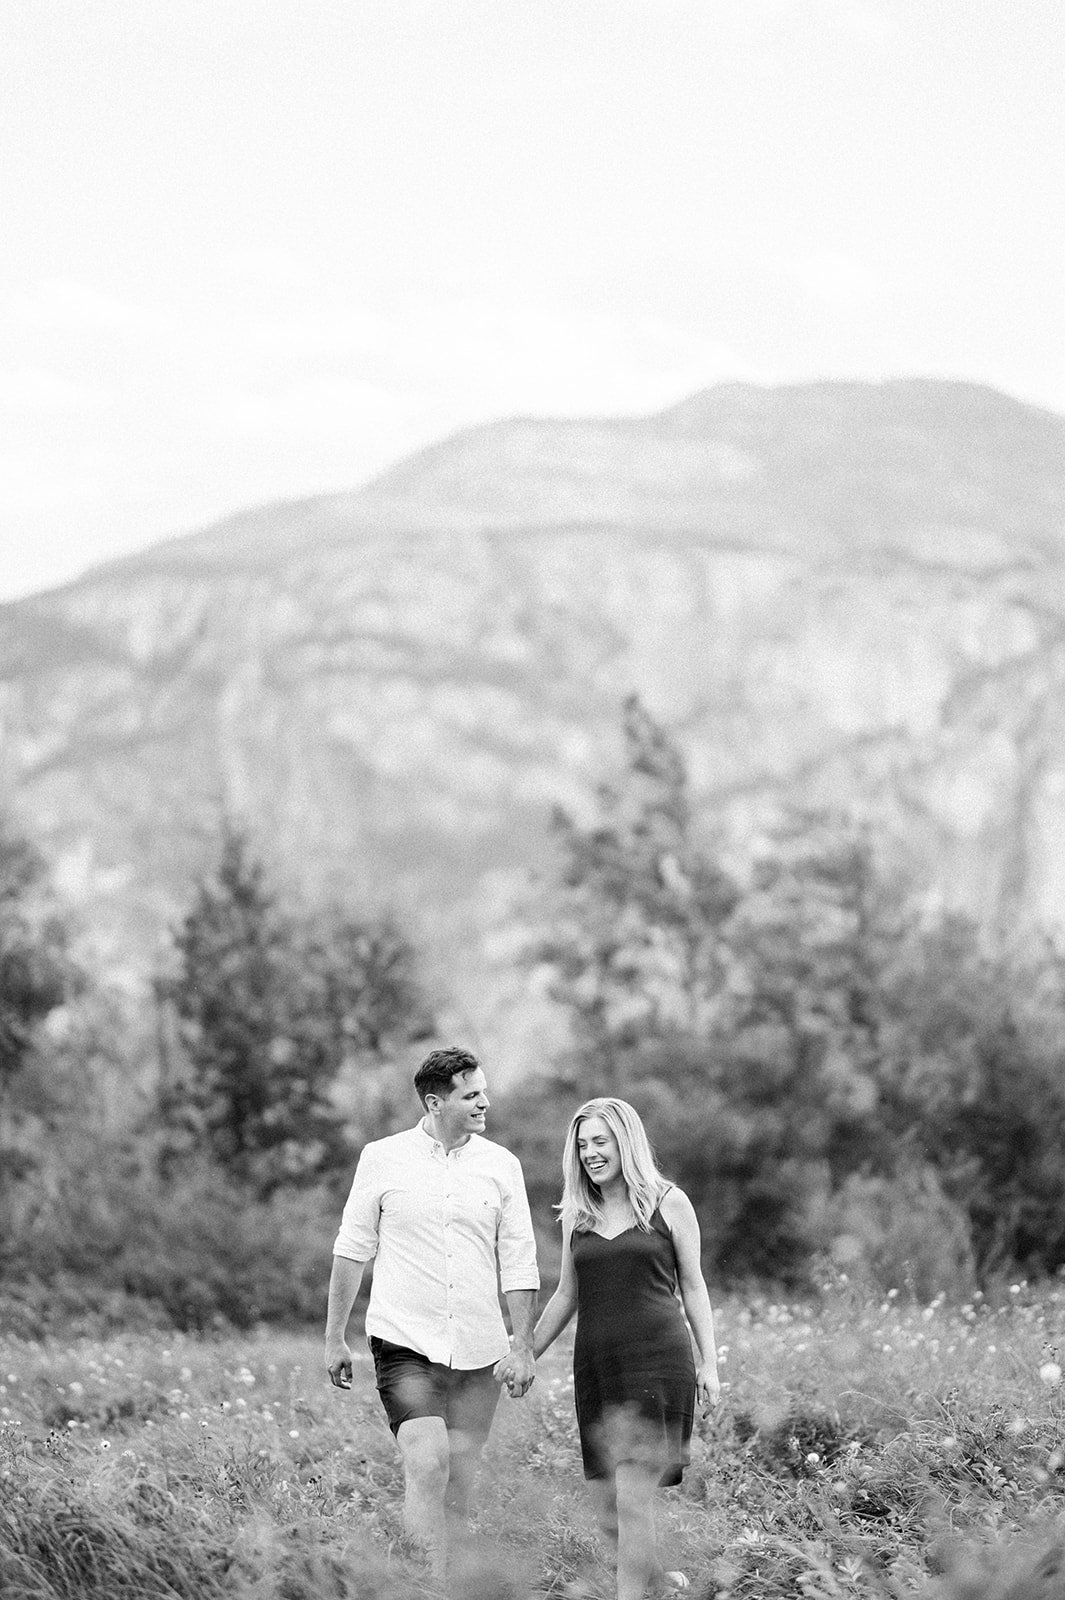 A young and beautiful engaged couple strolls through a grassy field in front of a large mountain in Squamish, BC.